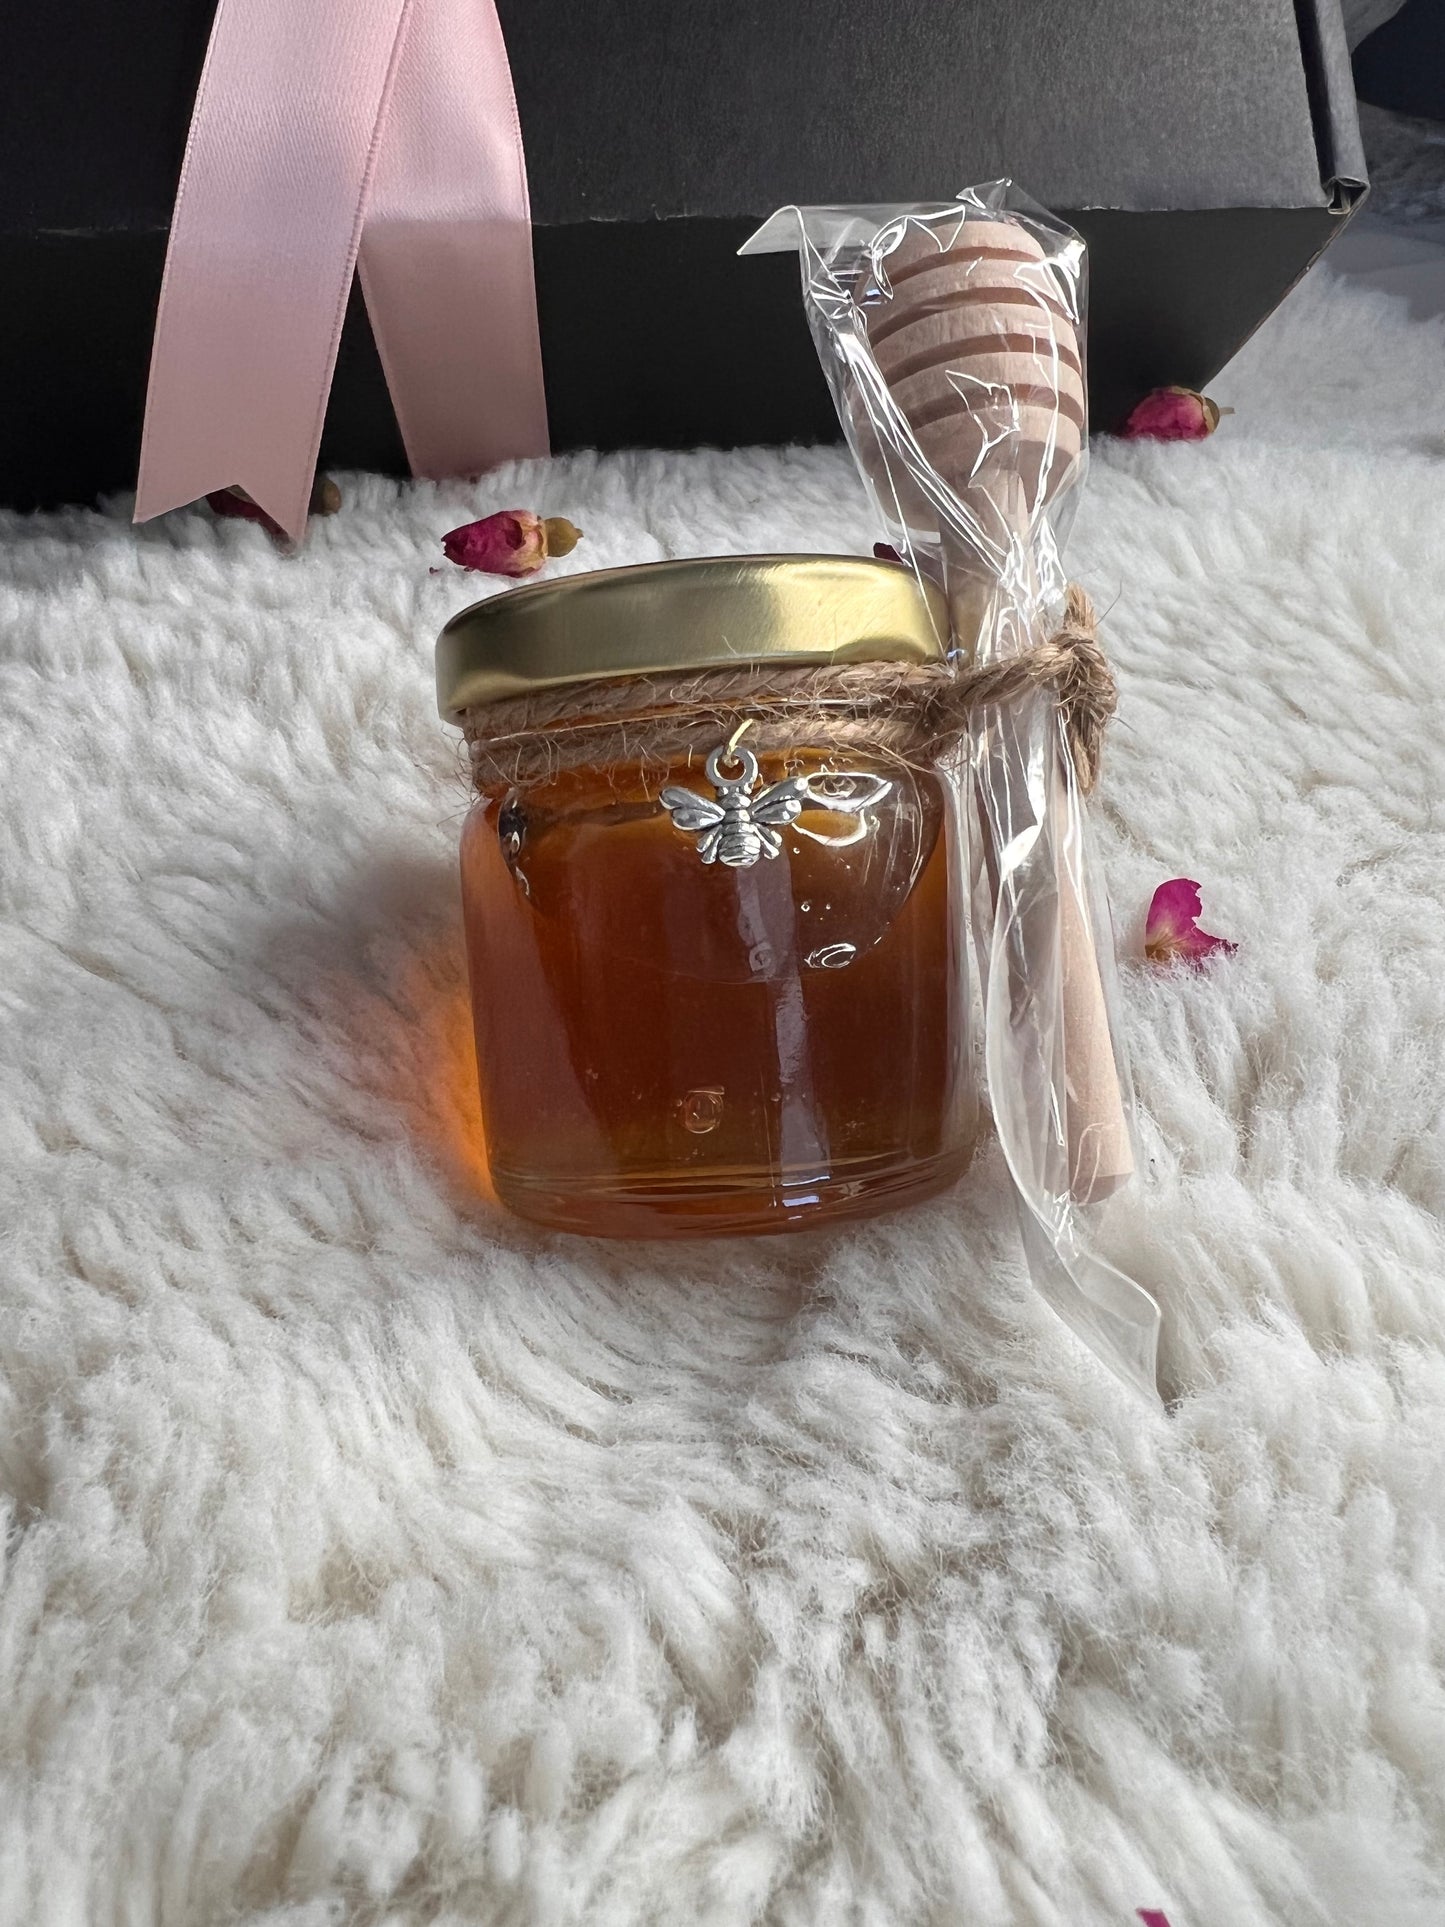 Valentine's Day Gift Box (candle, honey, tea, jewelry, crystals)